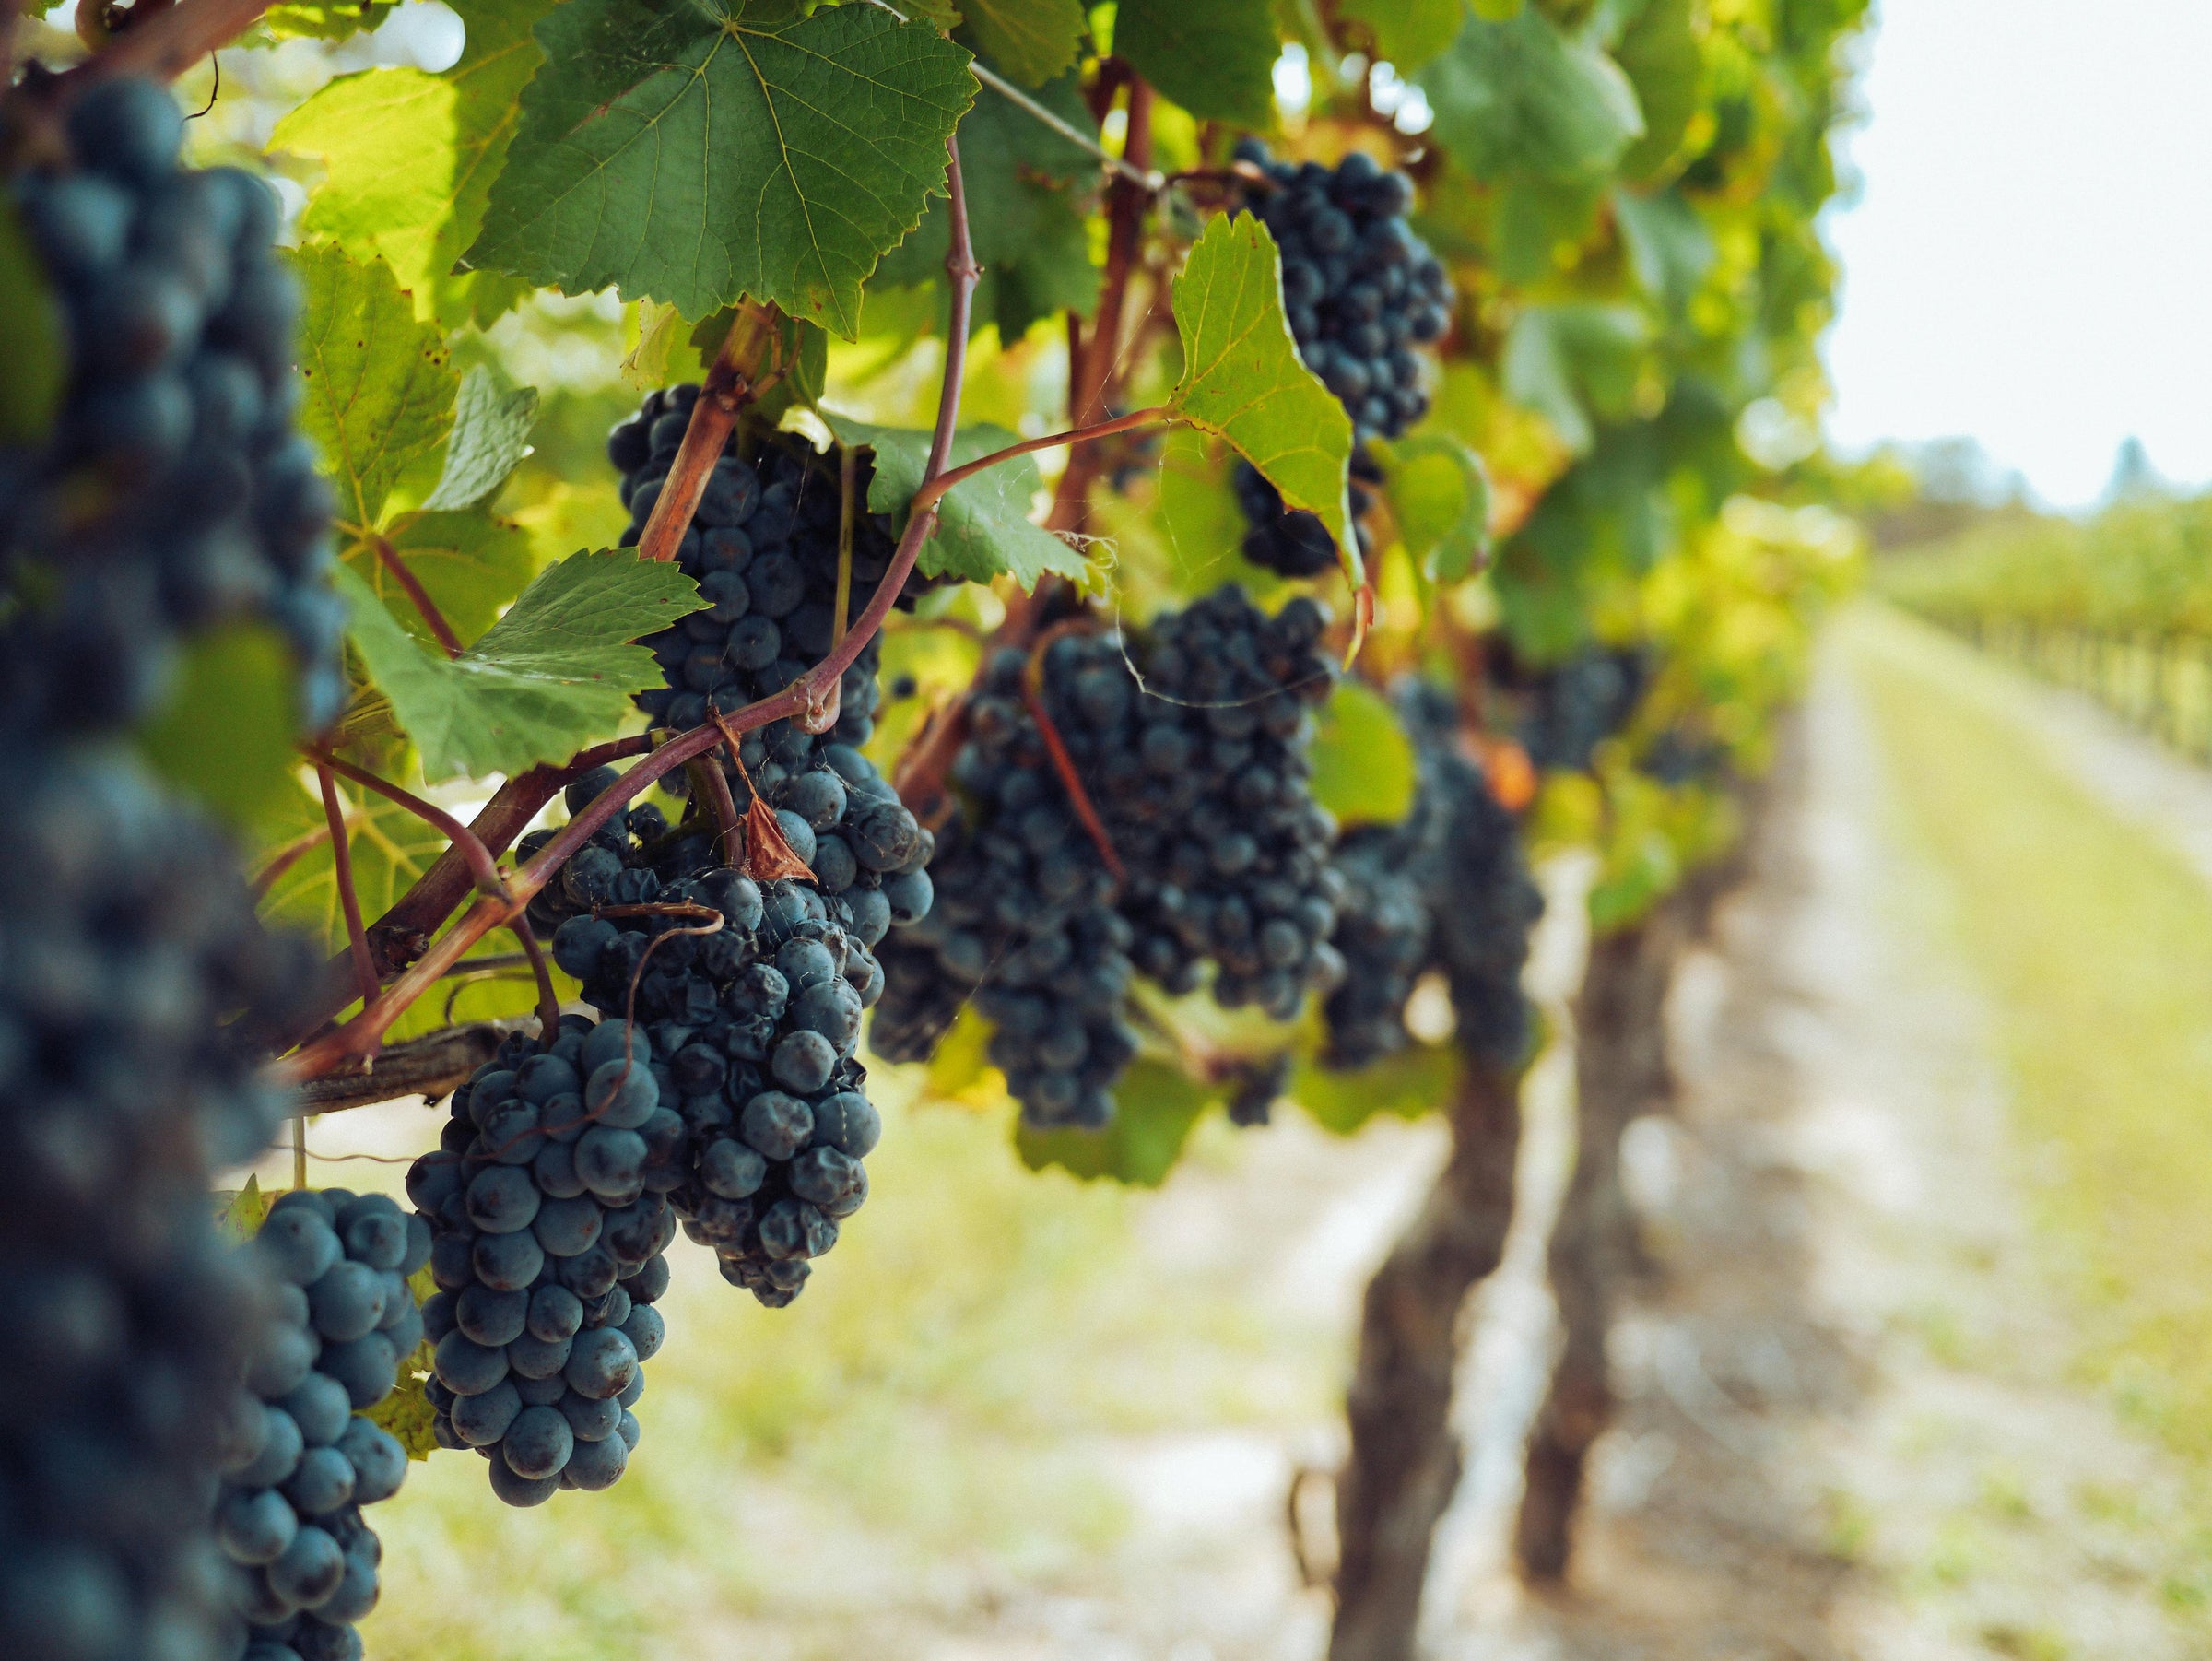 Photo by Grape Things: https://www.pexels.com/photo/bunches-of-grapes-hanging-from-vines-3840335/